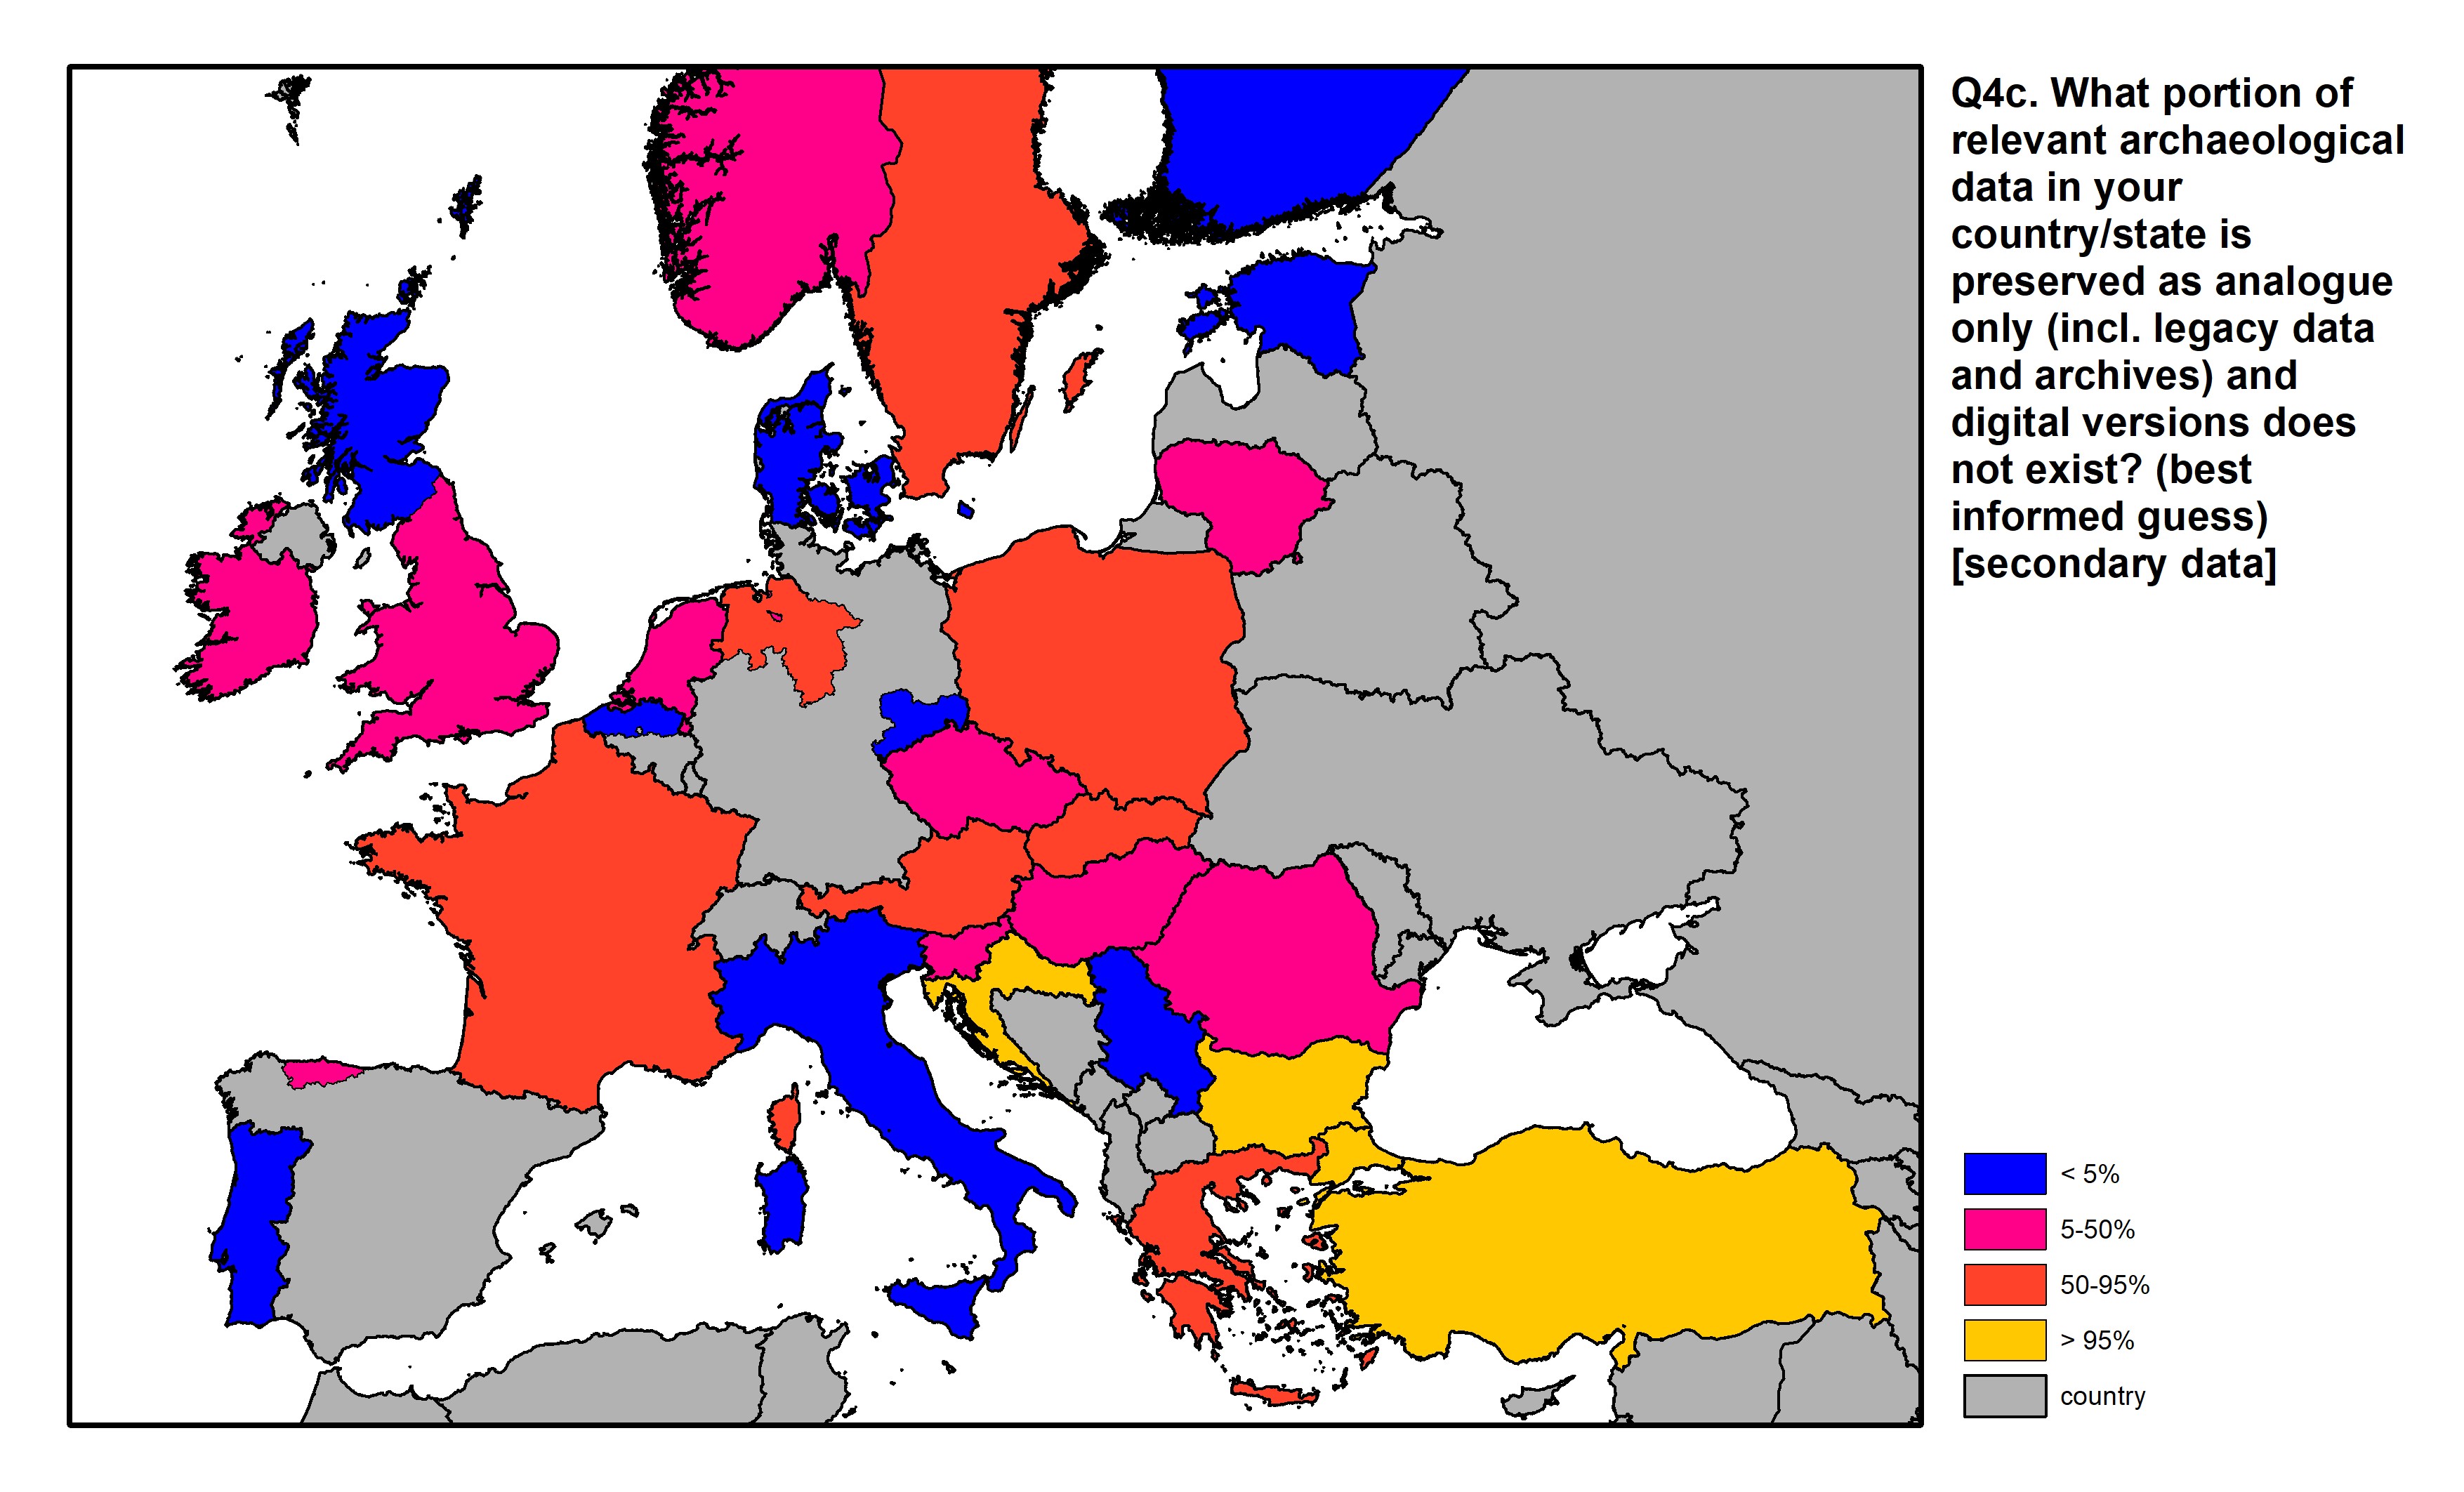 Figure 13: a map of Europe showing countries and regions in colour based on response rates to the survey question.